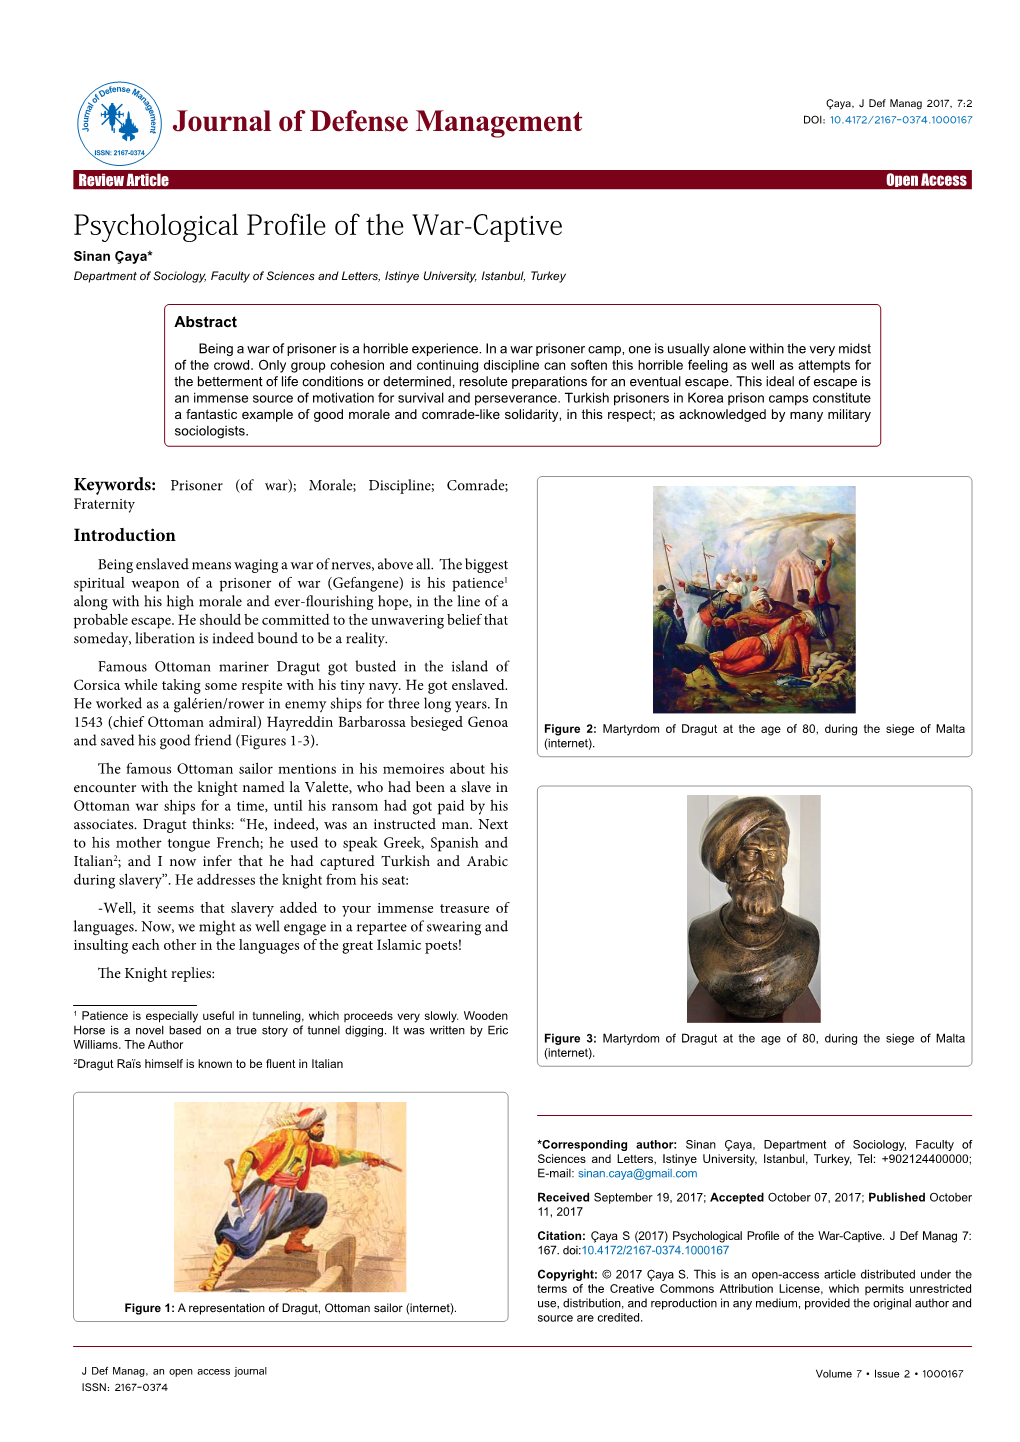 Psychological Profile of the War-Captive Sinan Çaya* Department of Sociology, Faculty of Sciences and Letters, Istinye University, Istanbul, Turkey